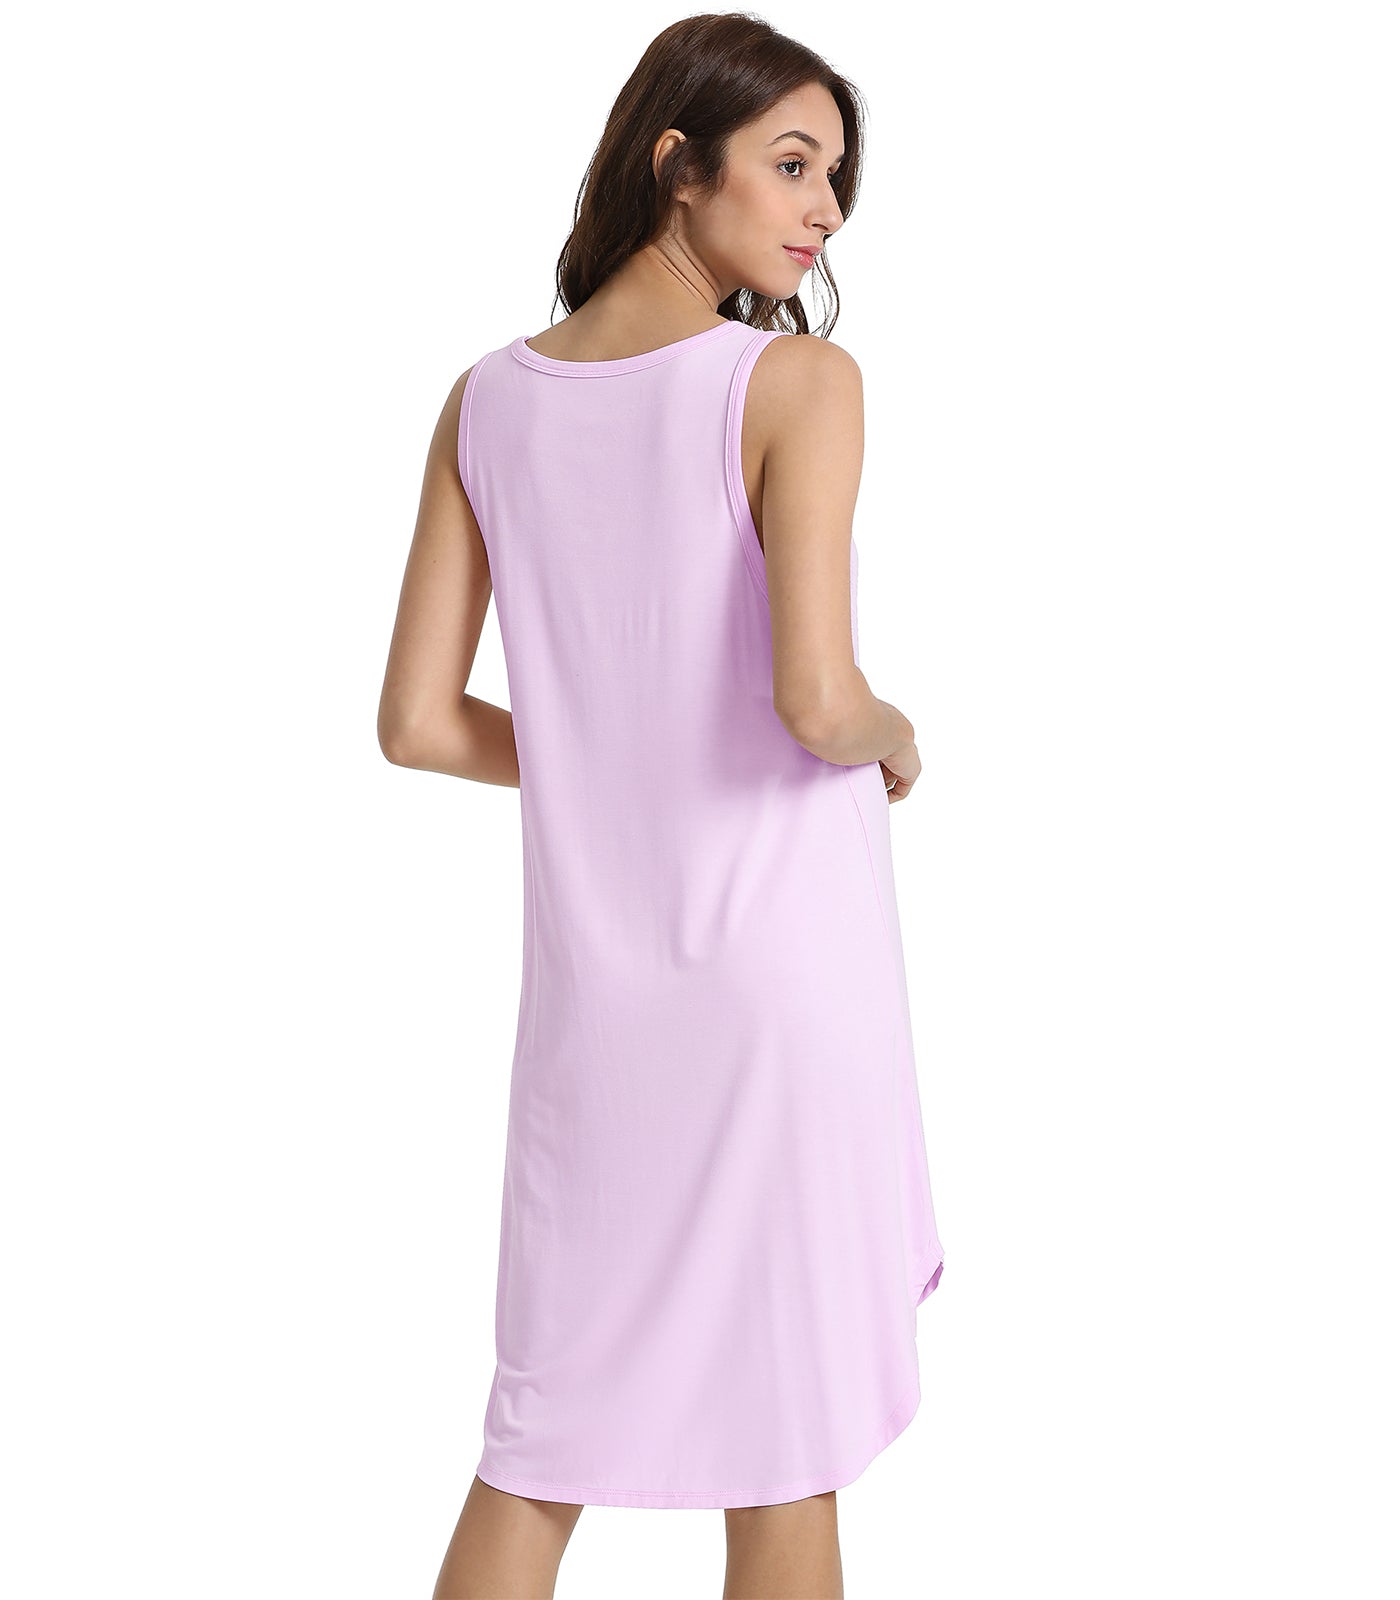 WiWi Womens Scoop Neck Sleeveless Nightgowns